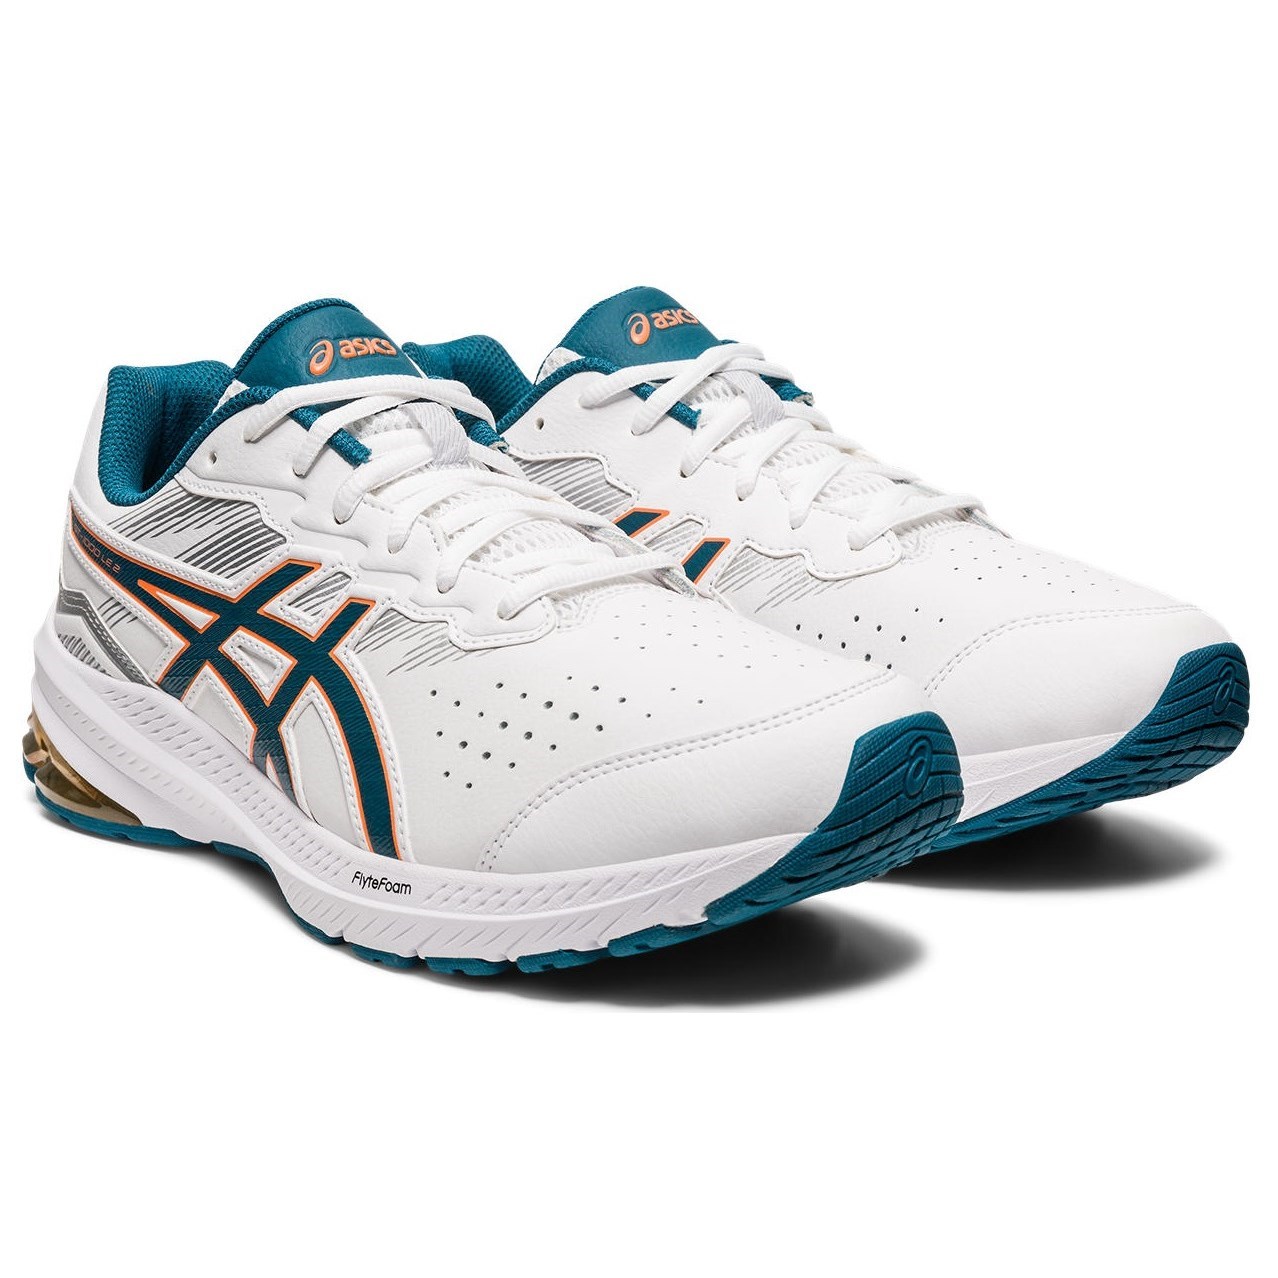 Asics GT-1000 LE 2 - Mens Cross Training Shoes - White/Ink Teal ...